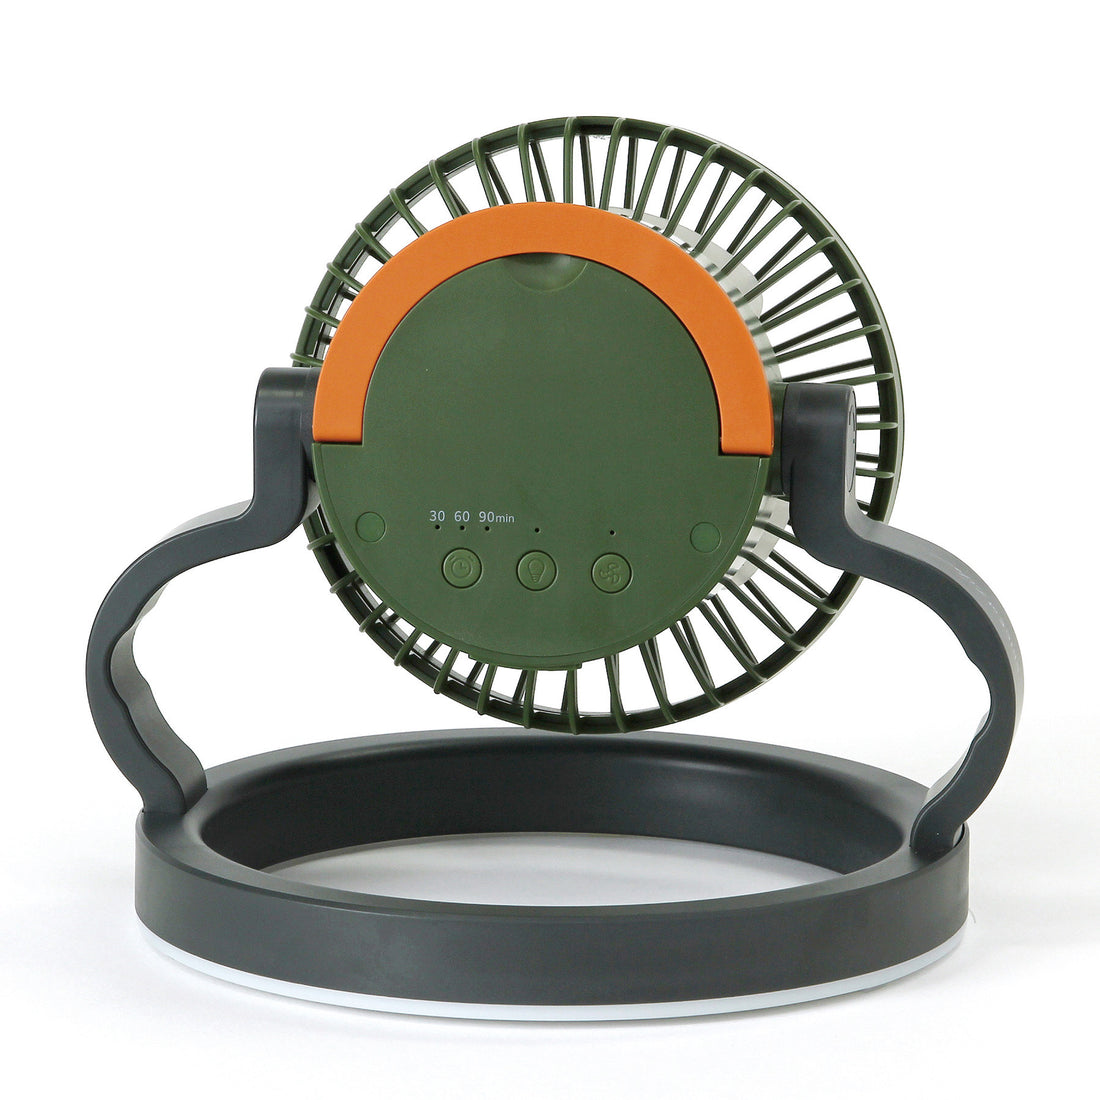 CIRCULAIRE : All-in-one portable fan & light with remote control